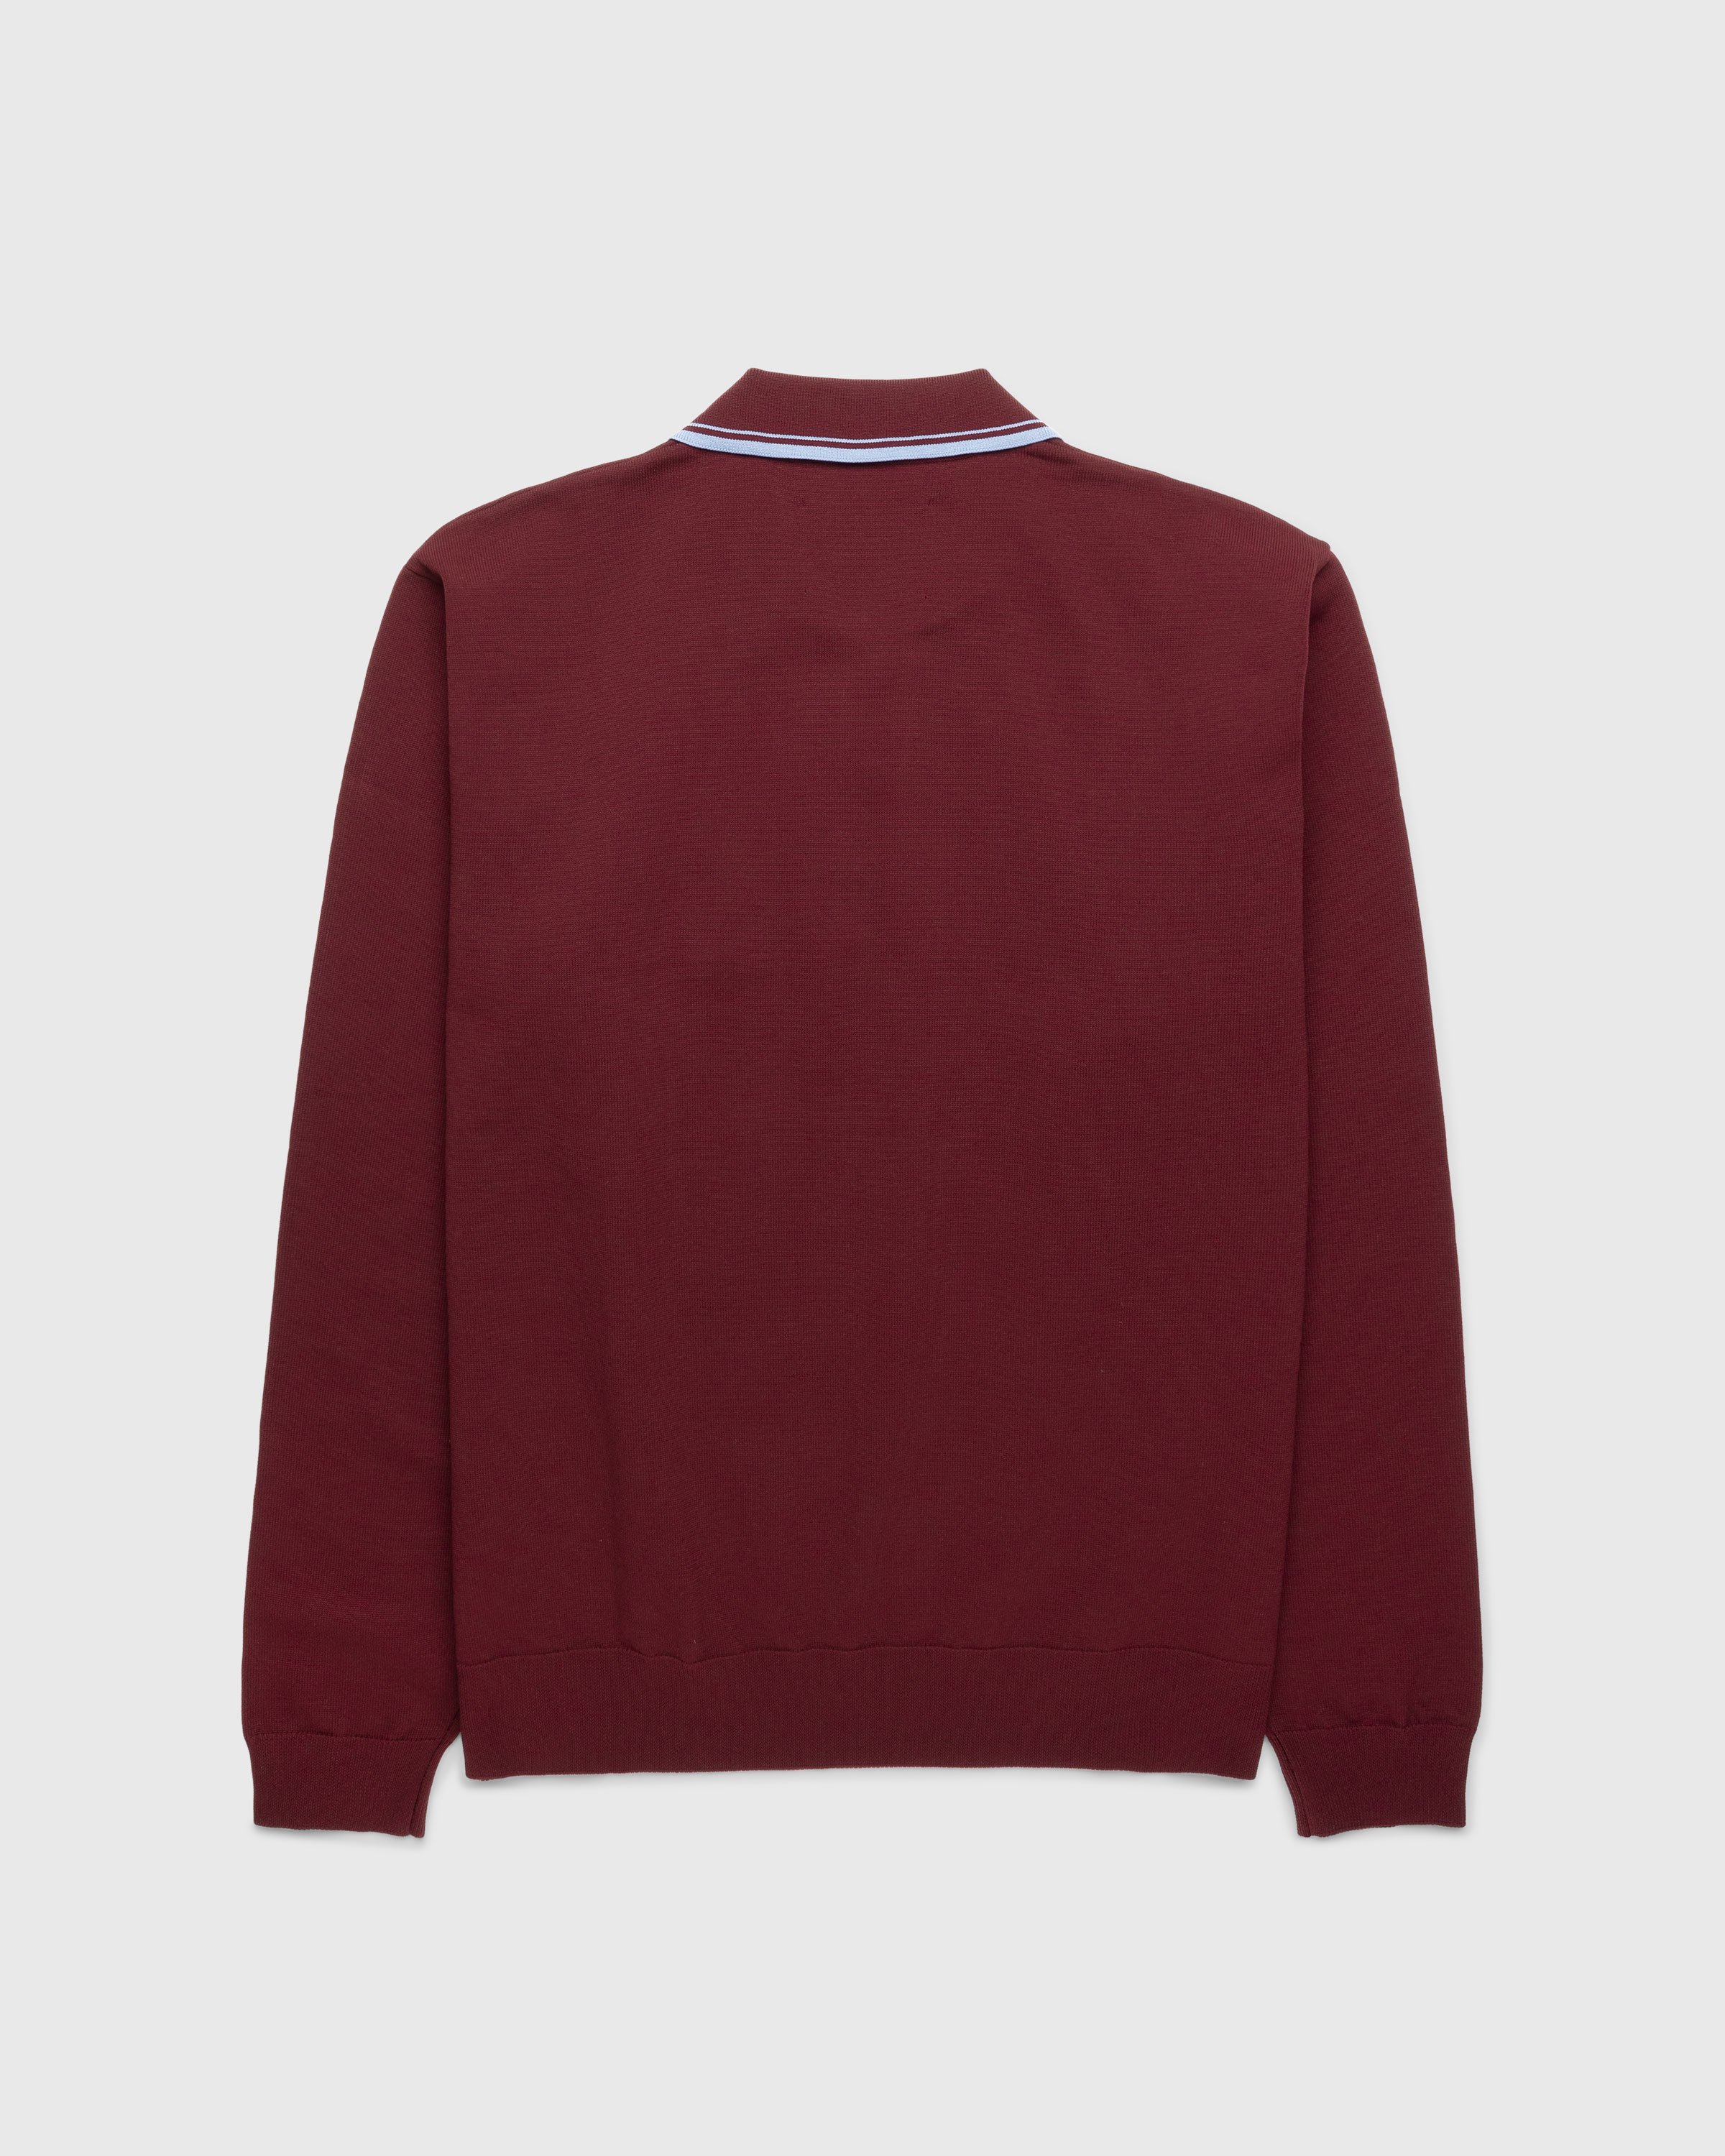 Highsnobiety HS05 - Long Sleeves Knit Polo Bordeaux - Clothing - Red - Image 2